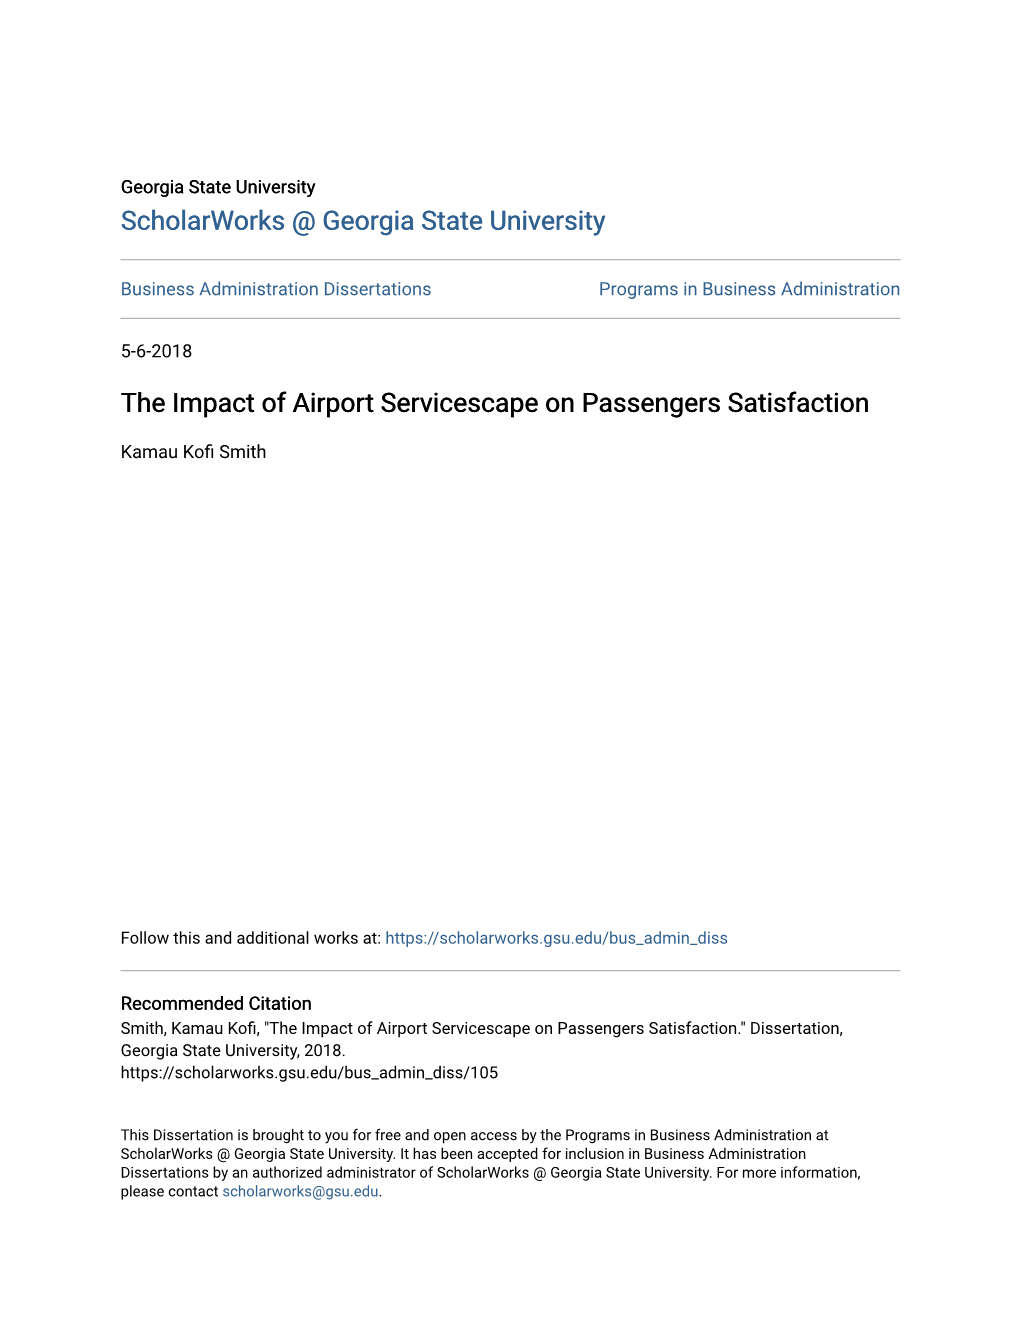 The Impact of Airport Servicescape on Passengers Satisfaction